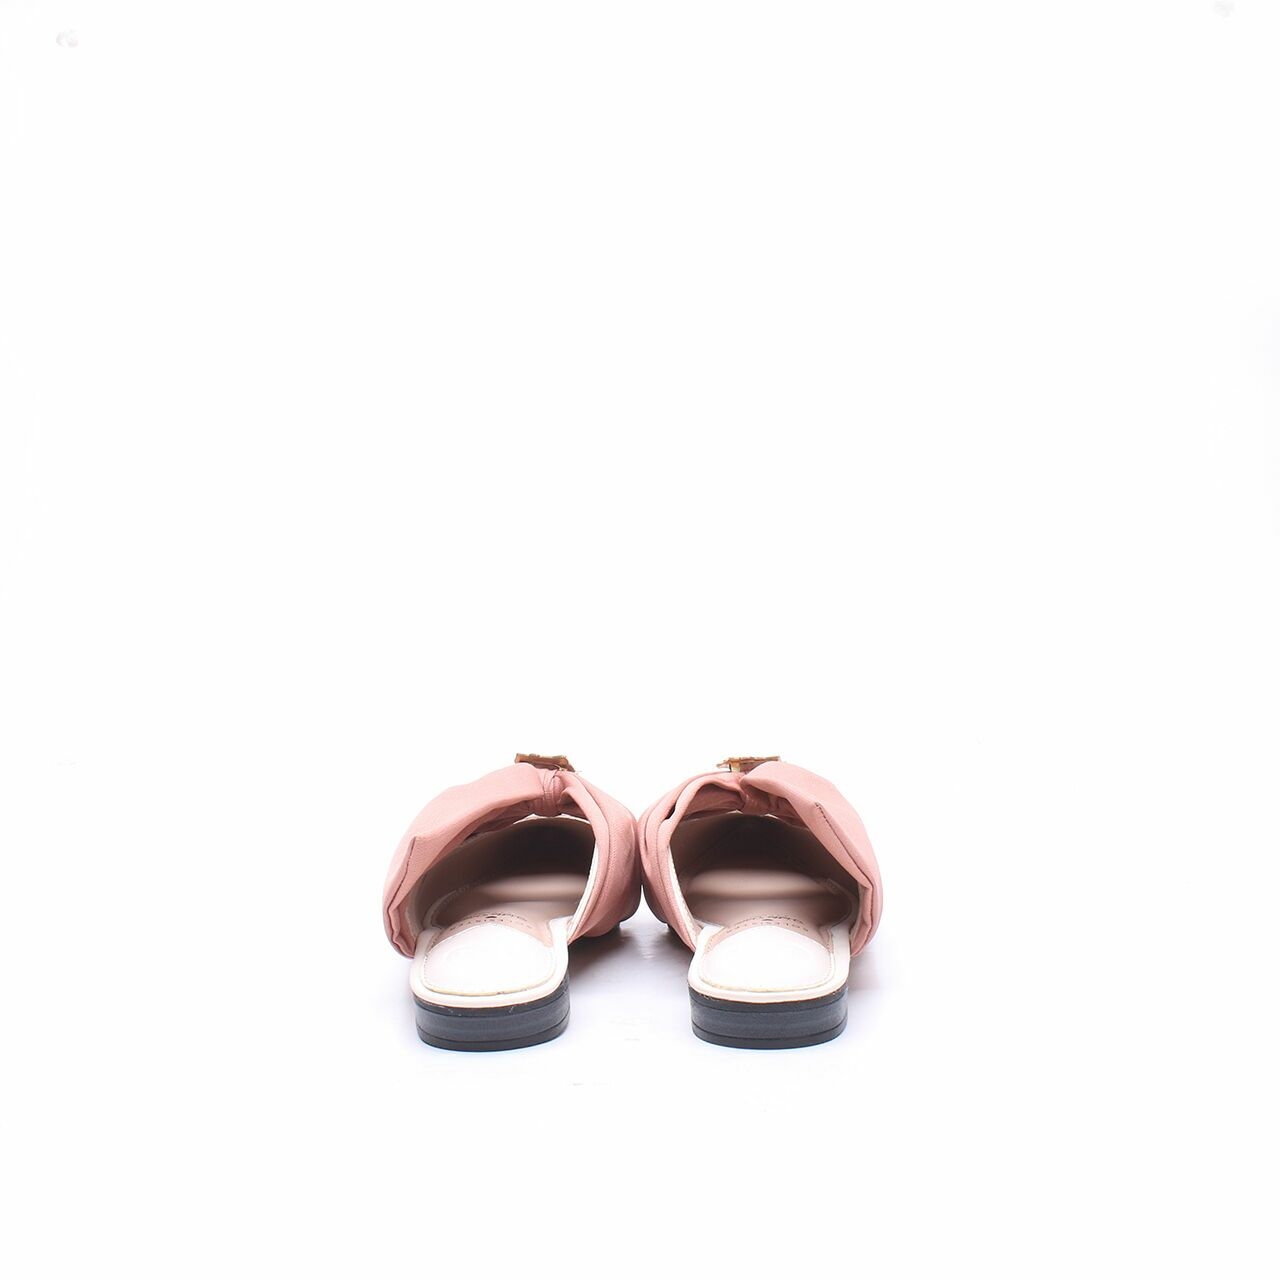 Solesister x Hello Kitty Pink Pearl Kei Mules Sandals